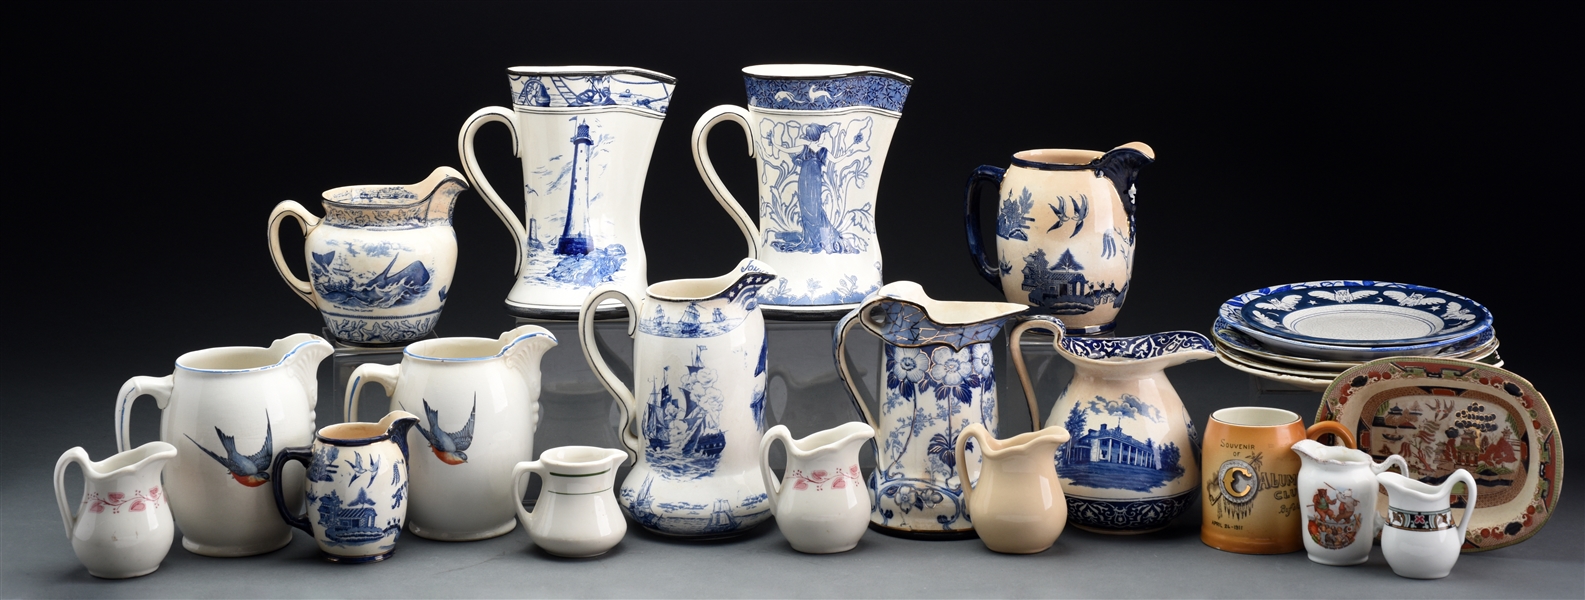 GROUP OF 26: 19TH CENTURY TRANSFER WARE PITCHERS AND CREAMERS. 